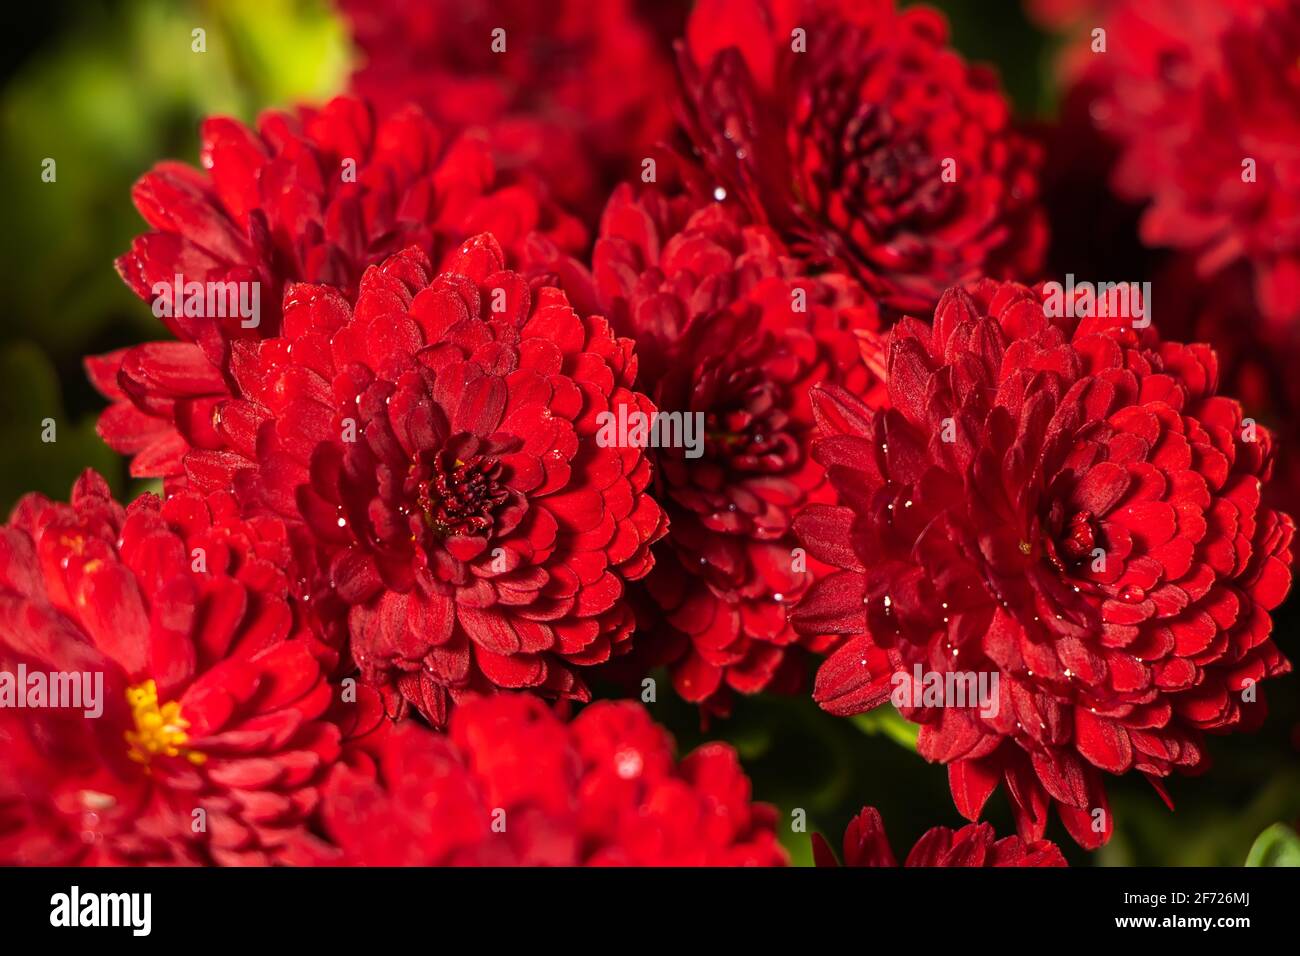 Dark rusty red aster dumosus flowers with yellow middles in german garden. Floral autumn background Stock Photo